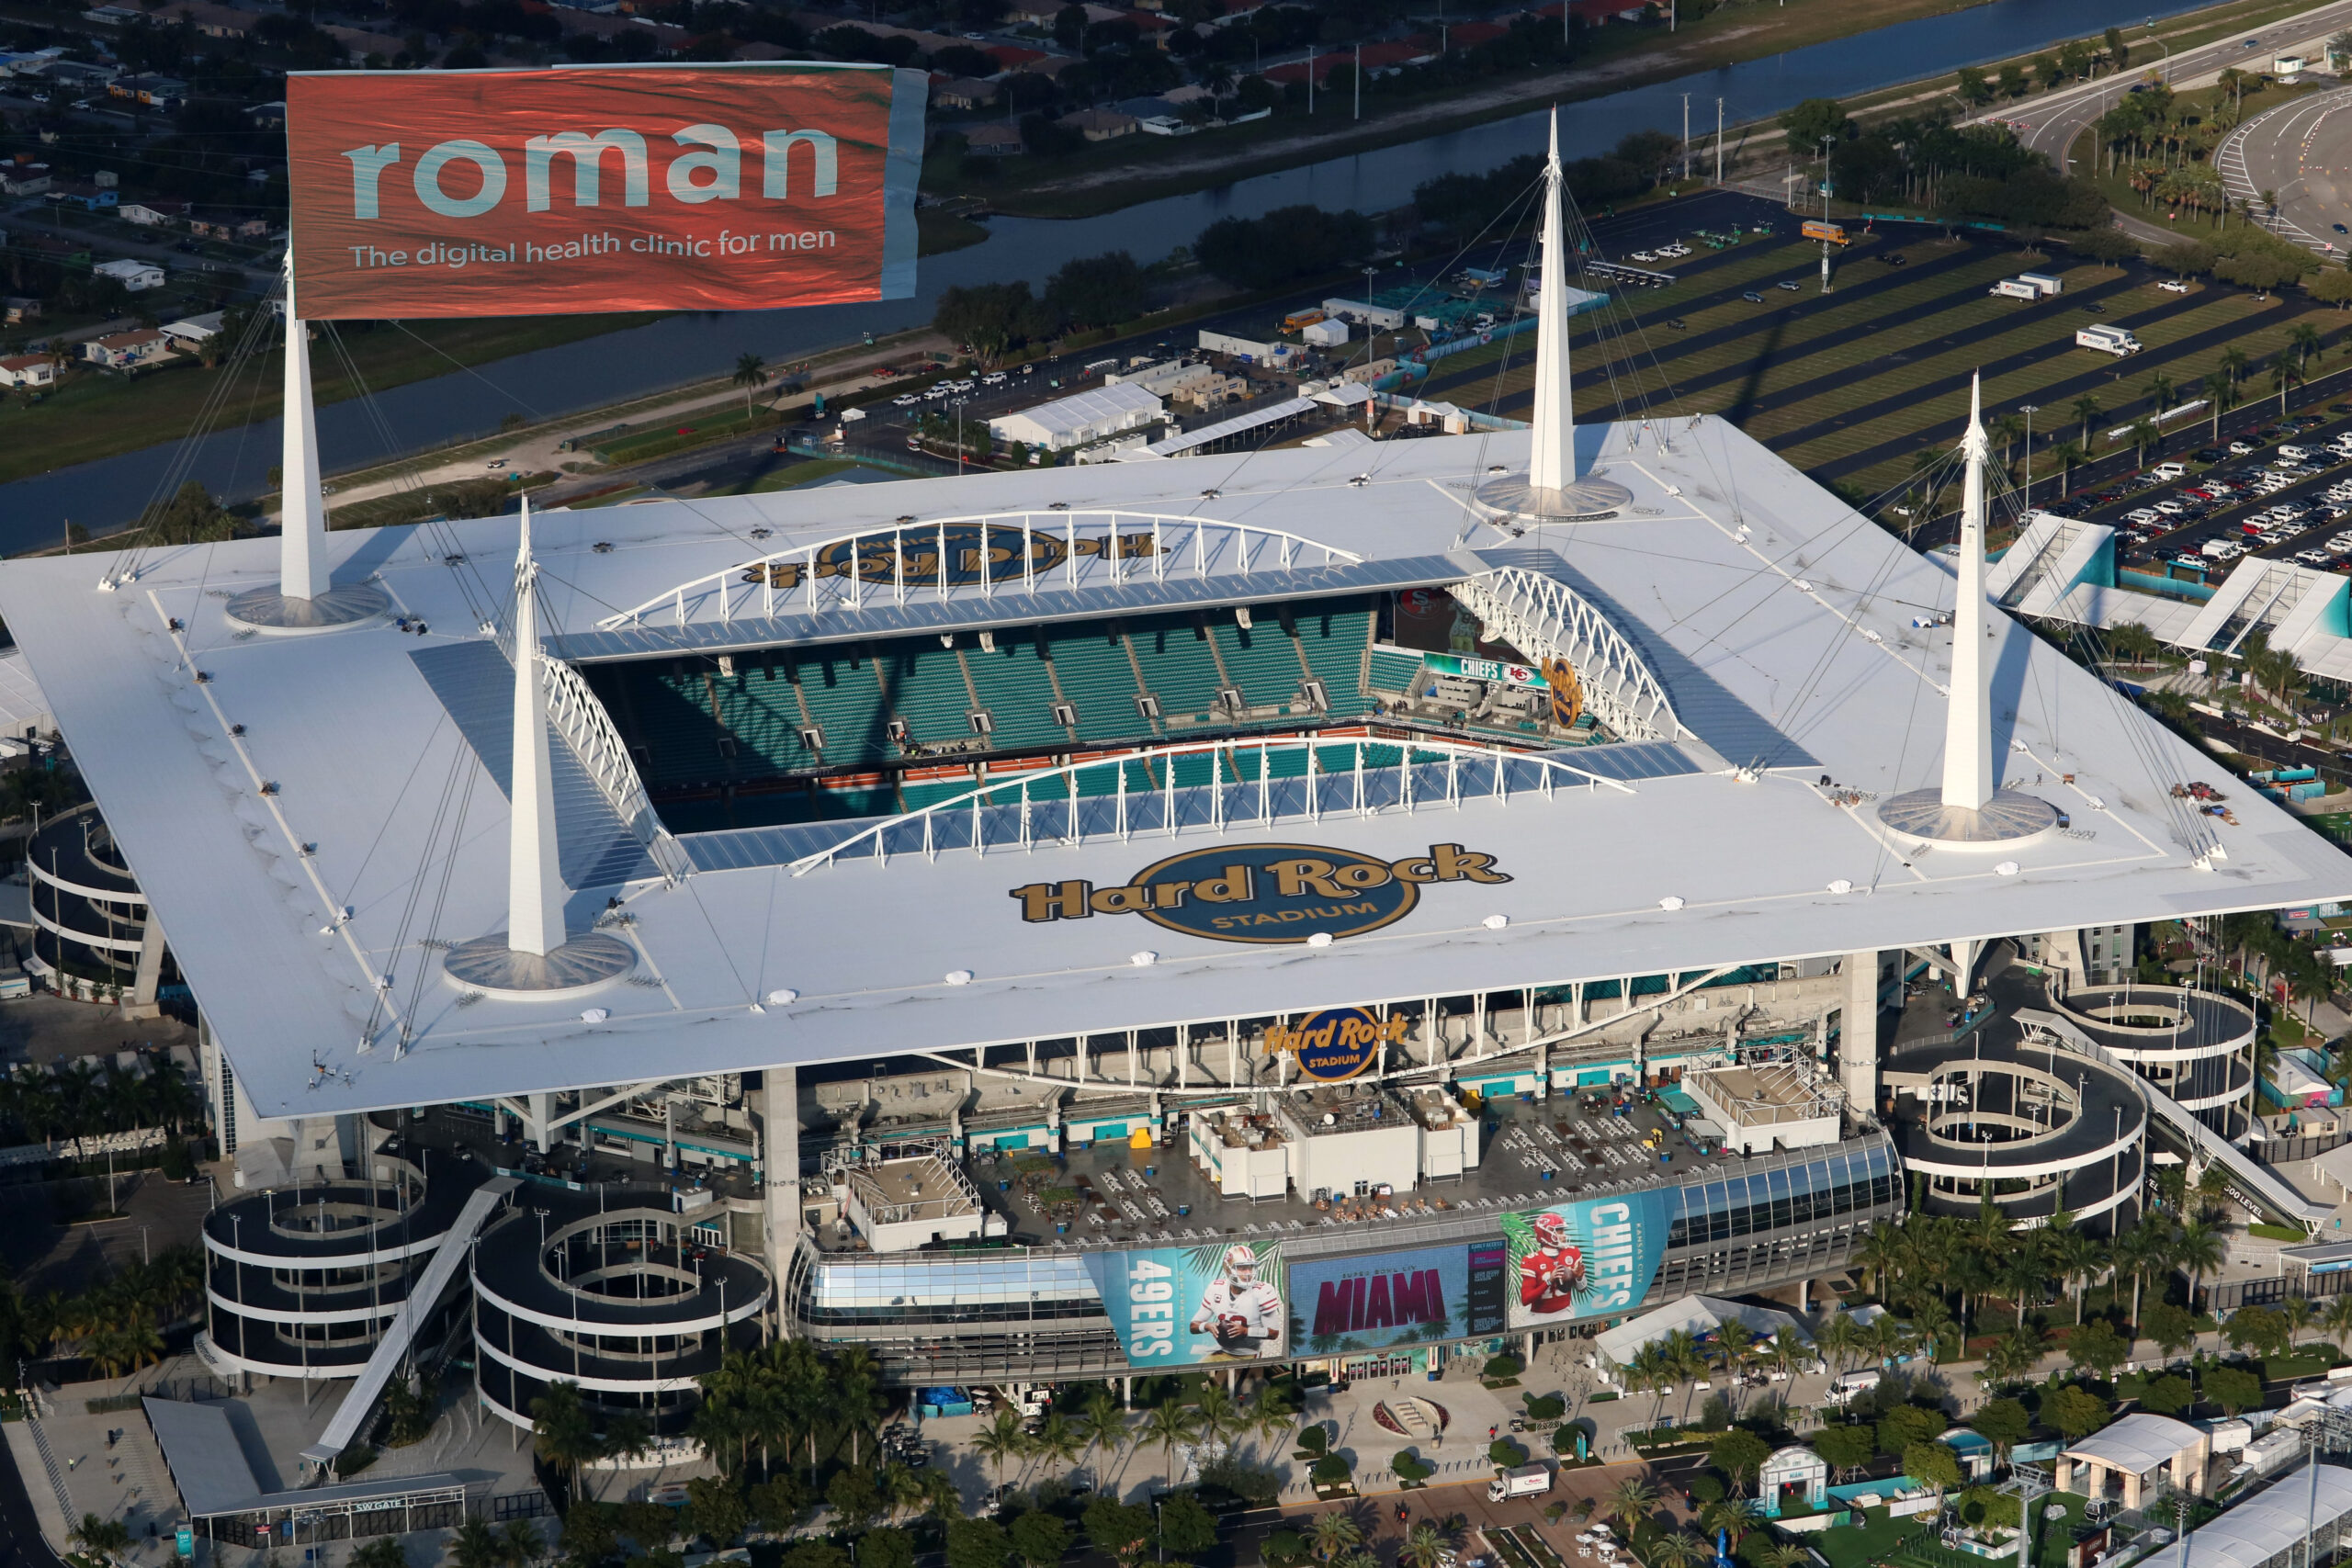 Two for One: How to Reach the 1M+ Super Bowl and WM Phoenix Open Attendees featured image